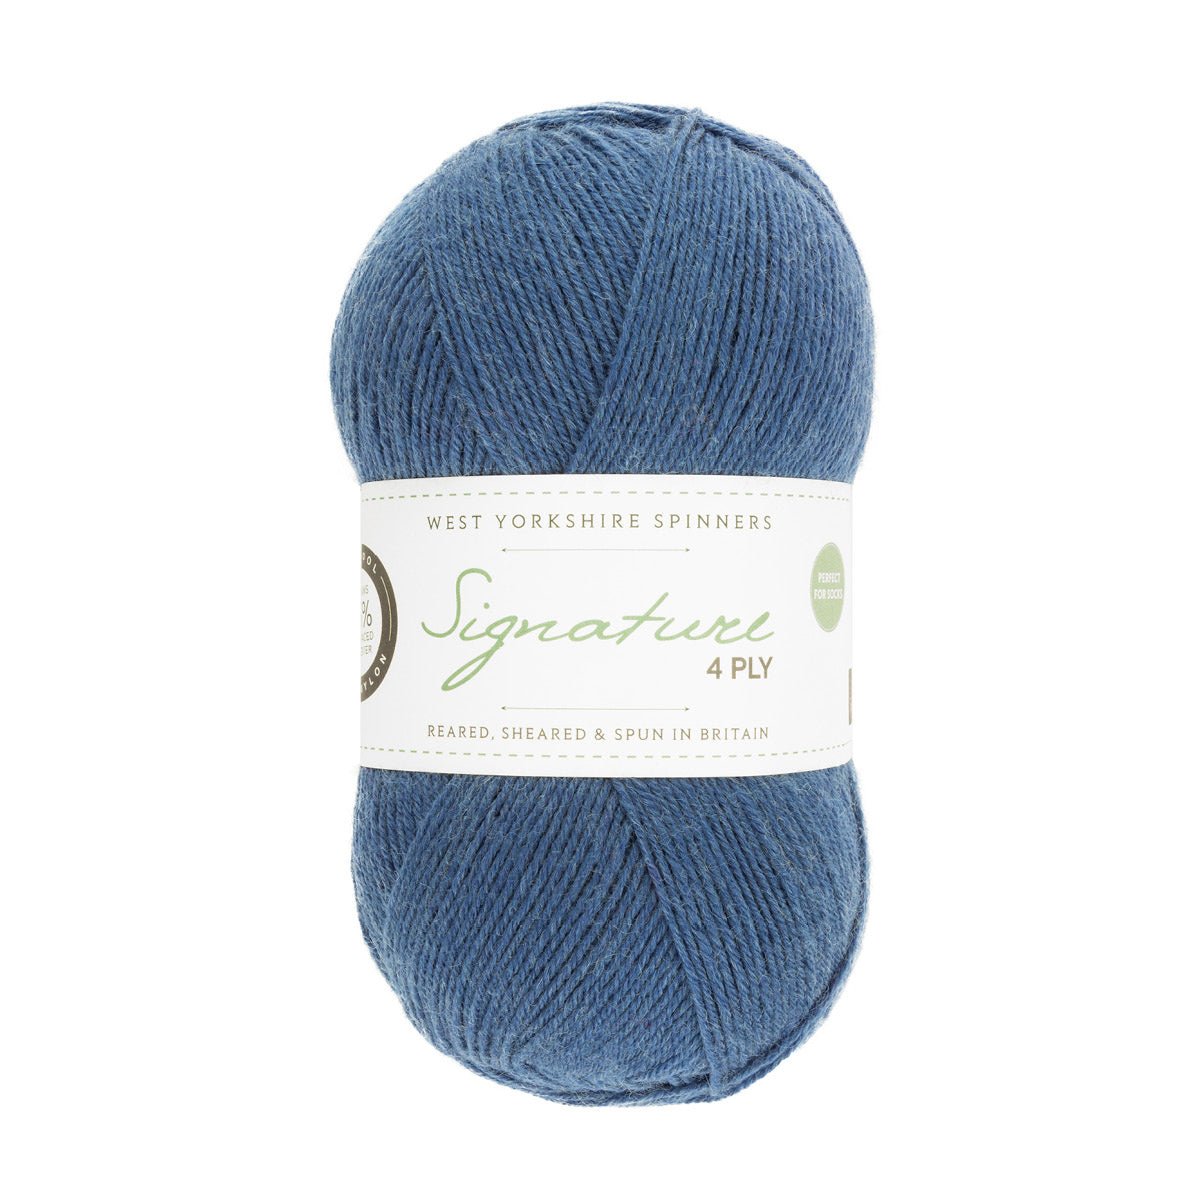 SIGNATURE 4PLY 157-Juniper - West Yorkshire Spinners